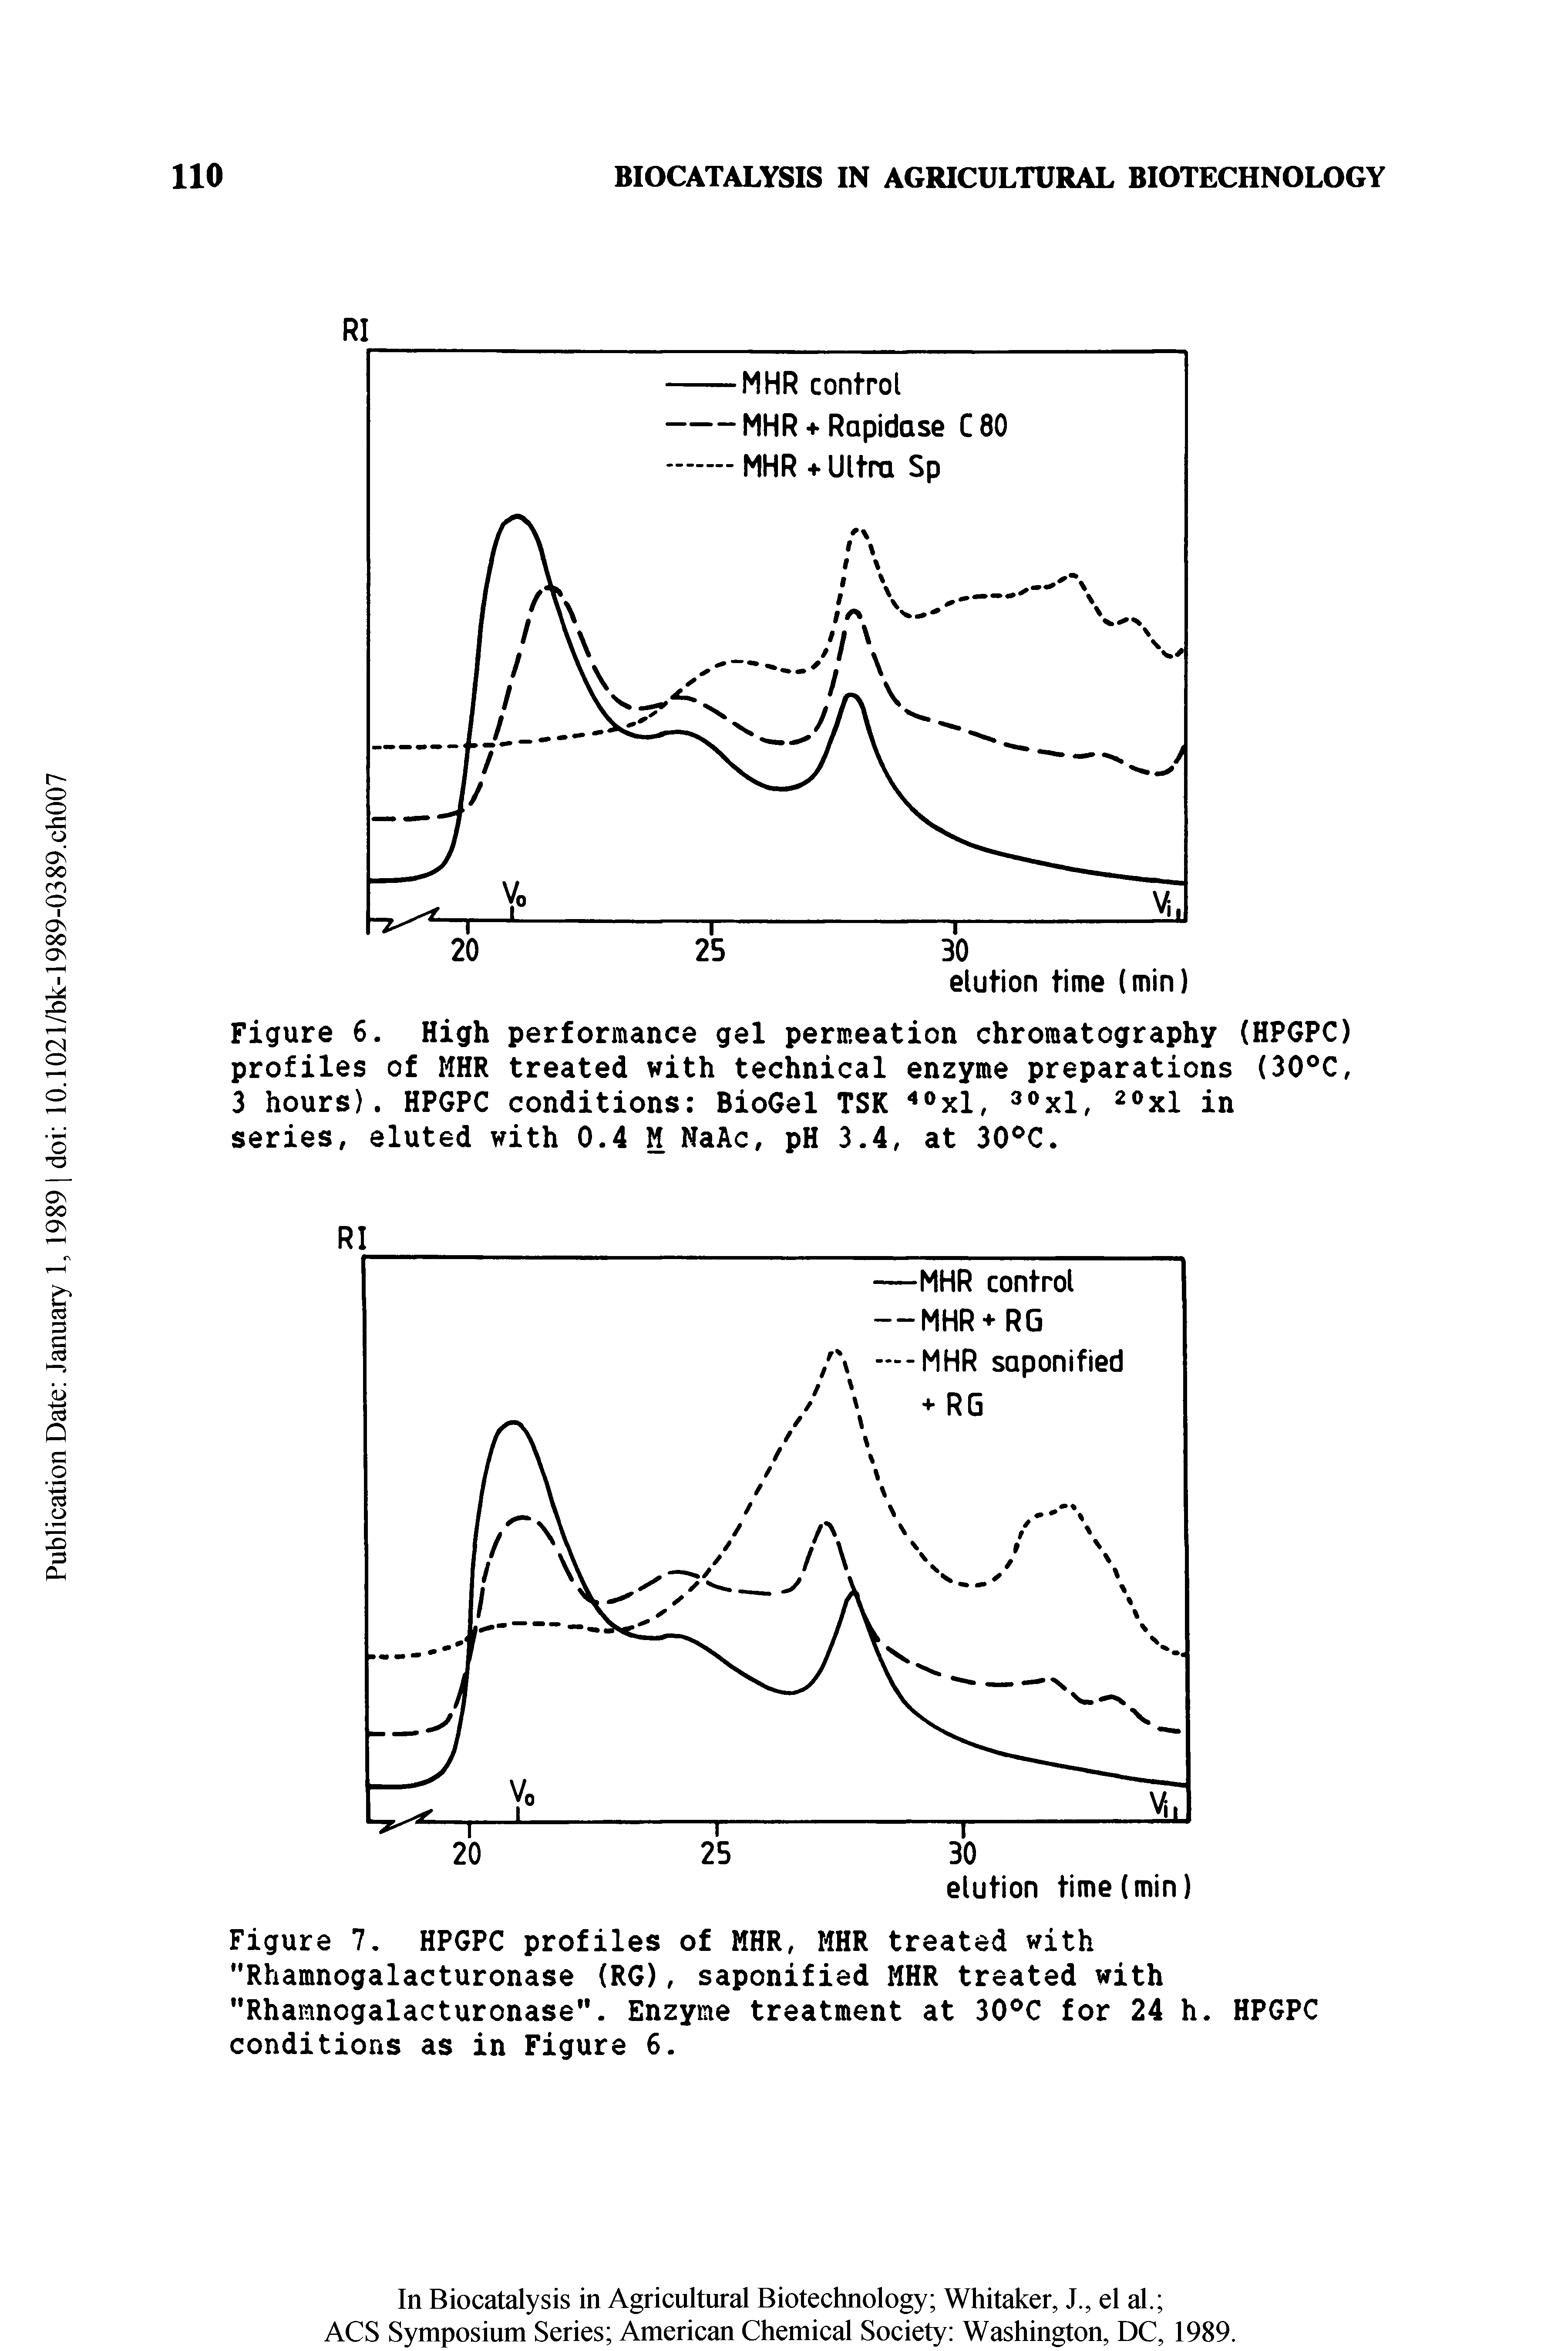 Figure 6. High performance gel permeation chromatography (HPGPC) profiles of MHR treated with technical enzyme preparations (30°C, 3 hours). HPGPC conditions BioGel TSK 40xl, 30xl, 20xl in series, eluted with 0.4 M NaAc, pH 3.4, at 30°C.